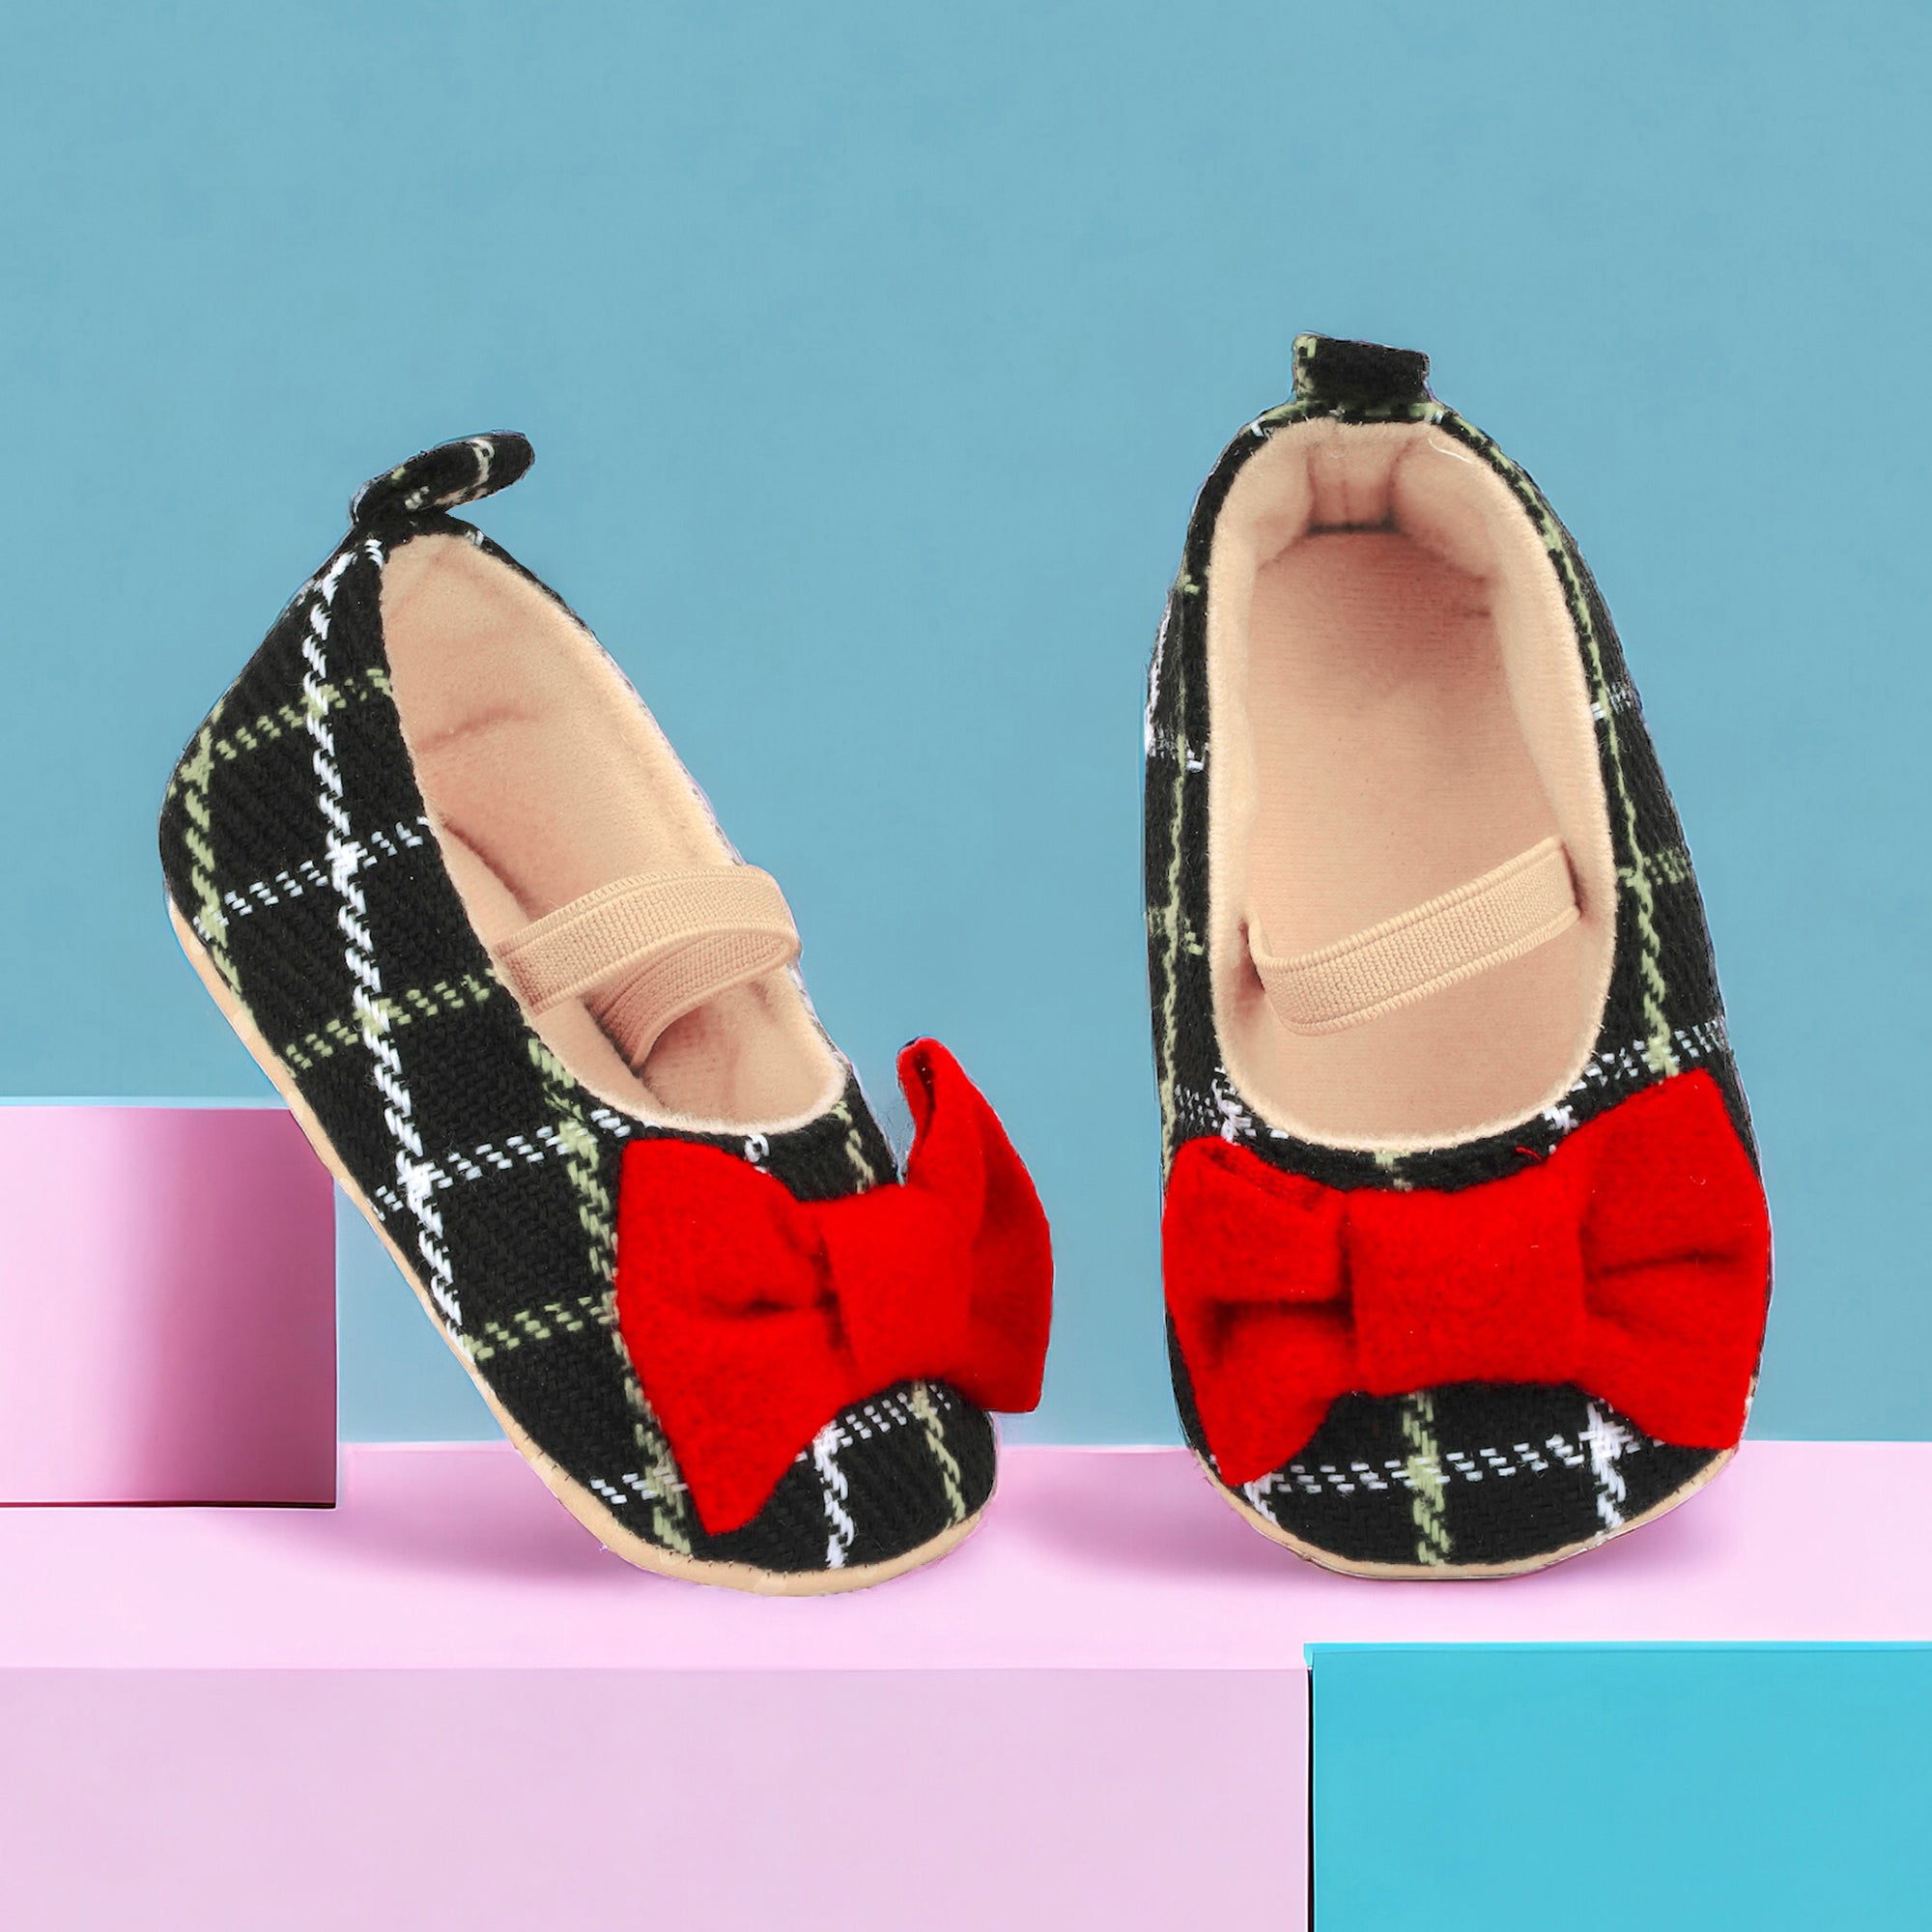 Baby Moo Bow With Elastic Strap Plaid Ballerina Booties - Black